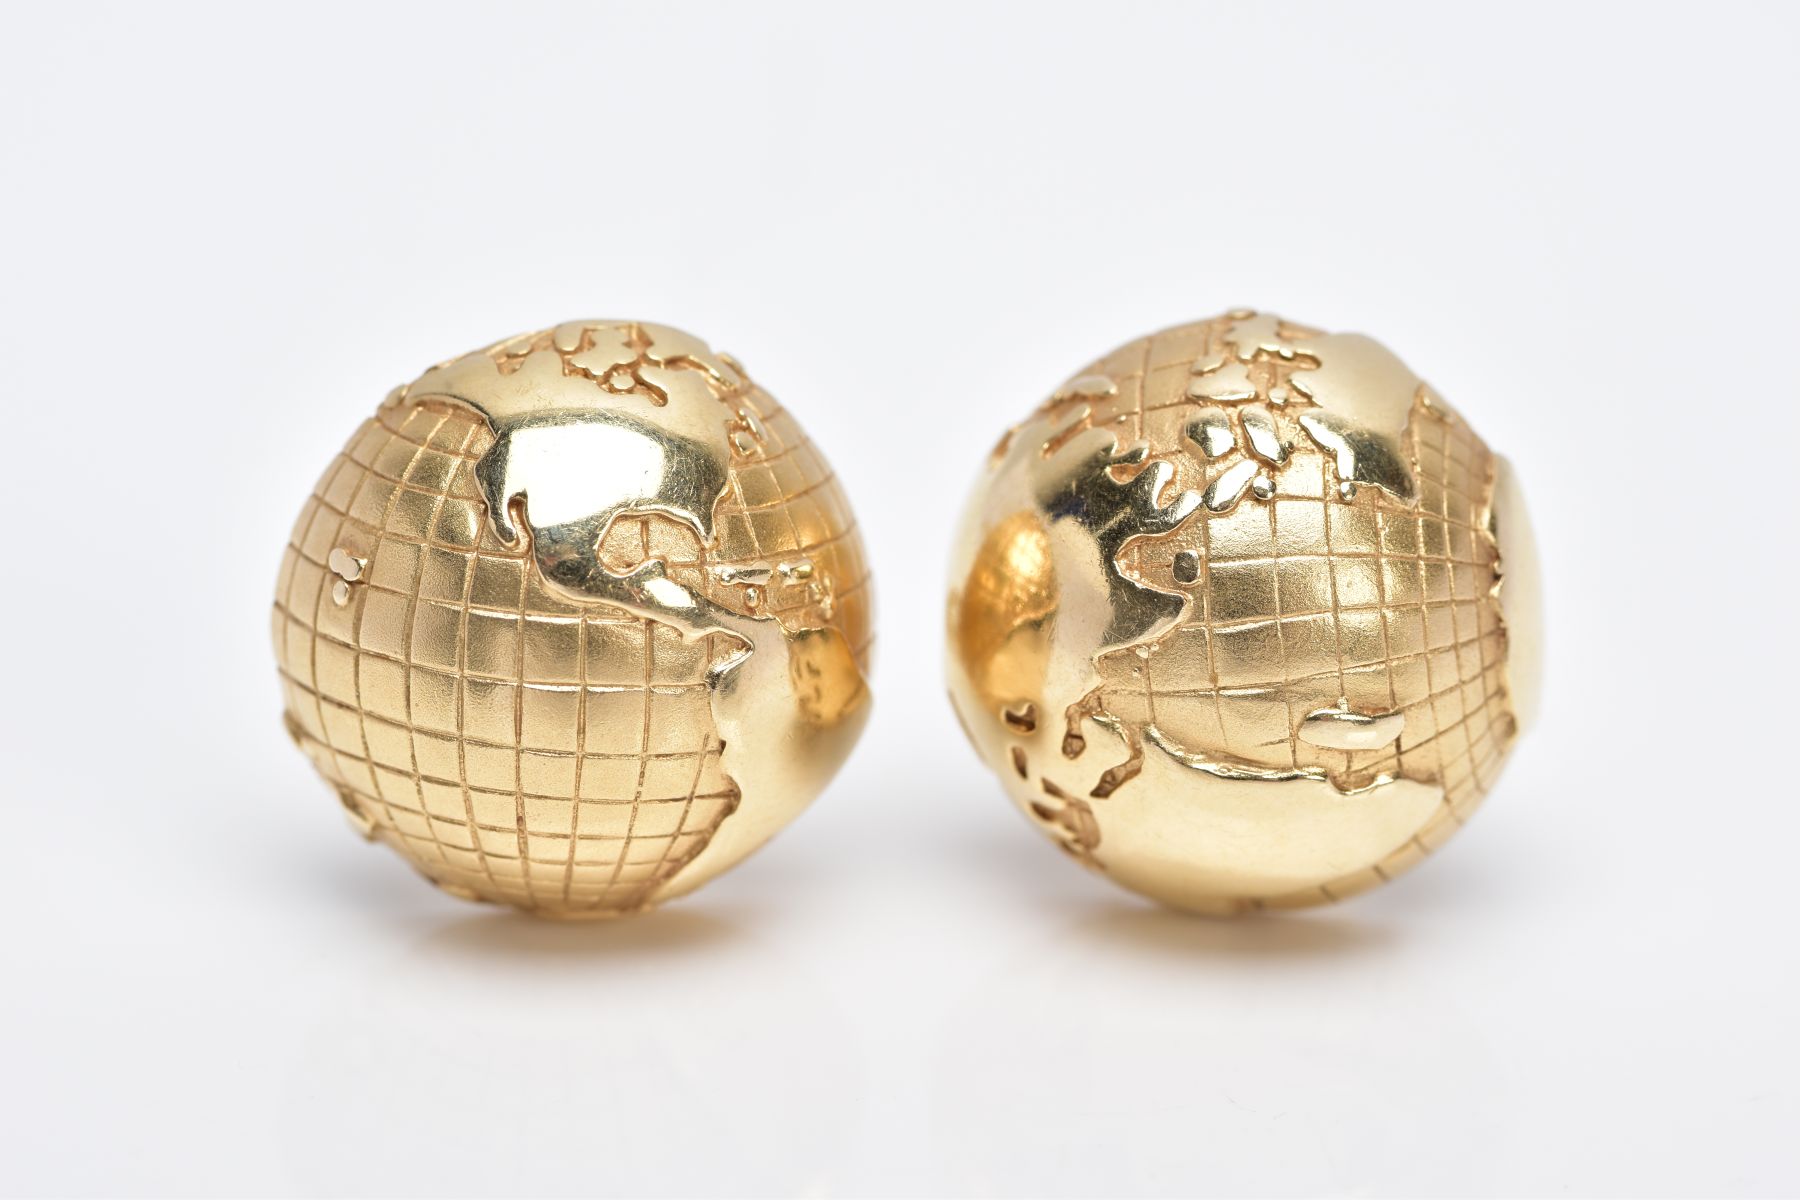 A PAIR OF YELLOW METAL EARRINGS, each of a circular half globe design with post and clip fittings